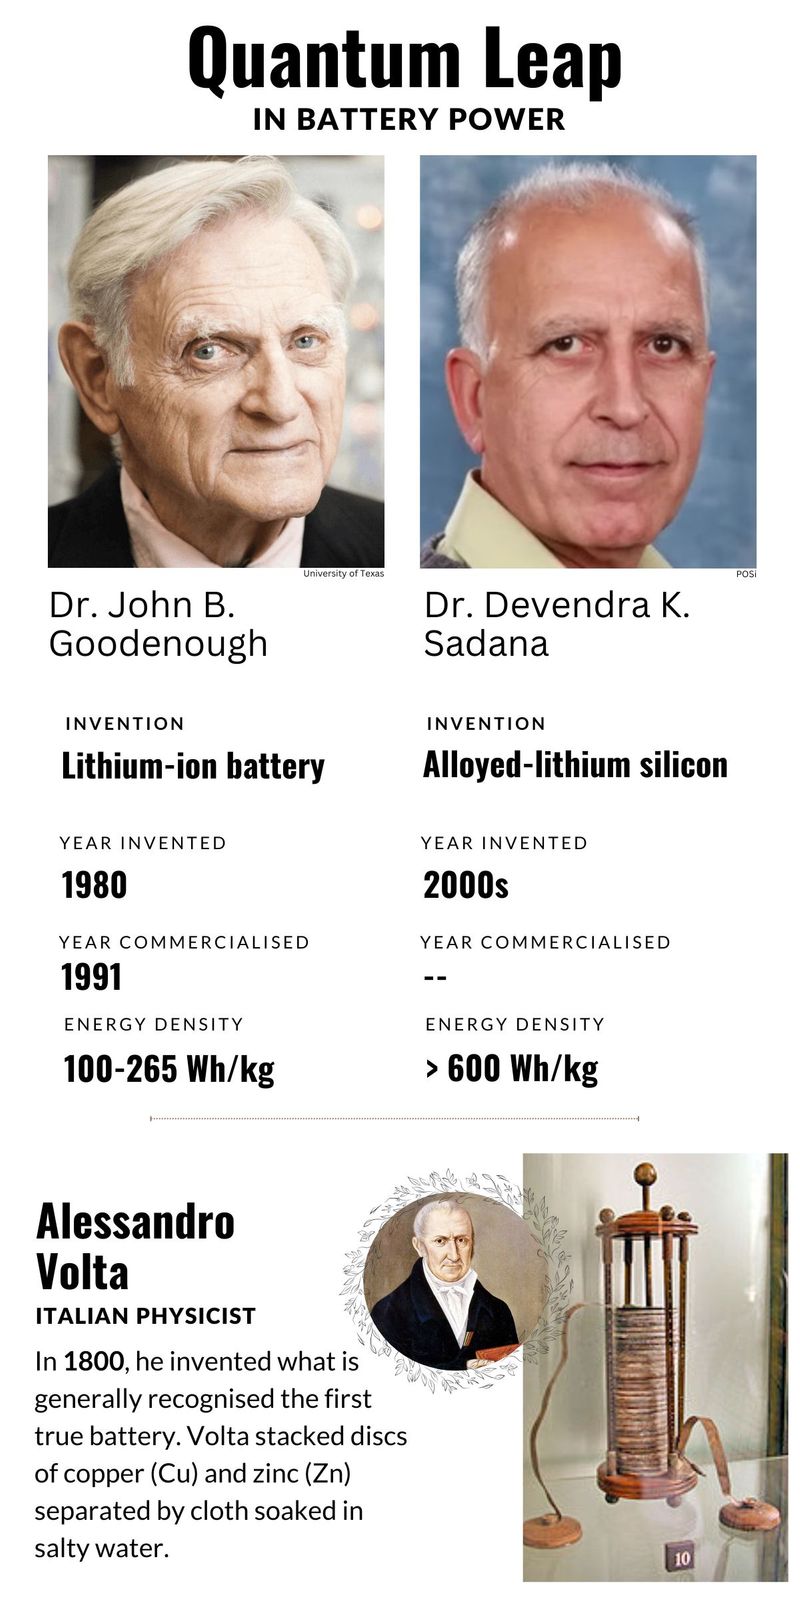 Li-ion battery is also known as the “Goodenough battery,” first developed by researcher Dr John B. Goodenough in 1980. It took another 11 years — in 1991 — before Sony turned Goodenough’s invention into a product. Today, Li-ion batteries are the most widely used gear to power laptops, smartphones, power tools, scooties and EVs.